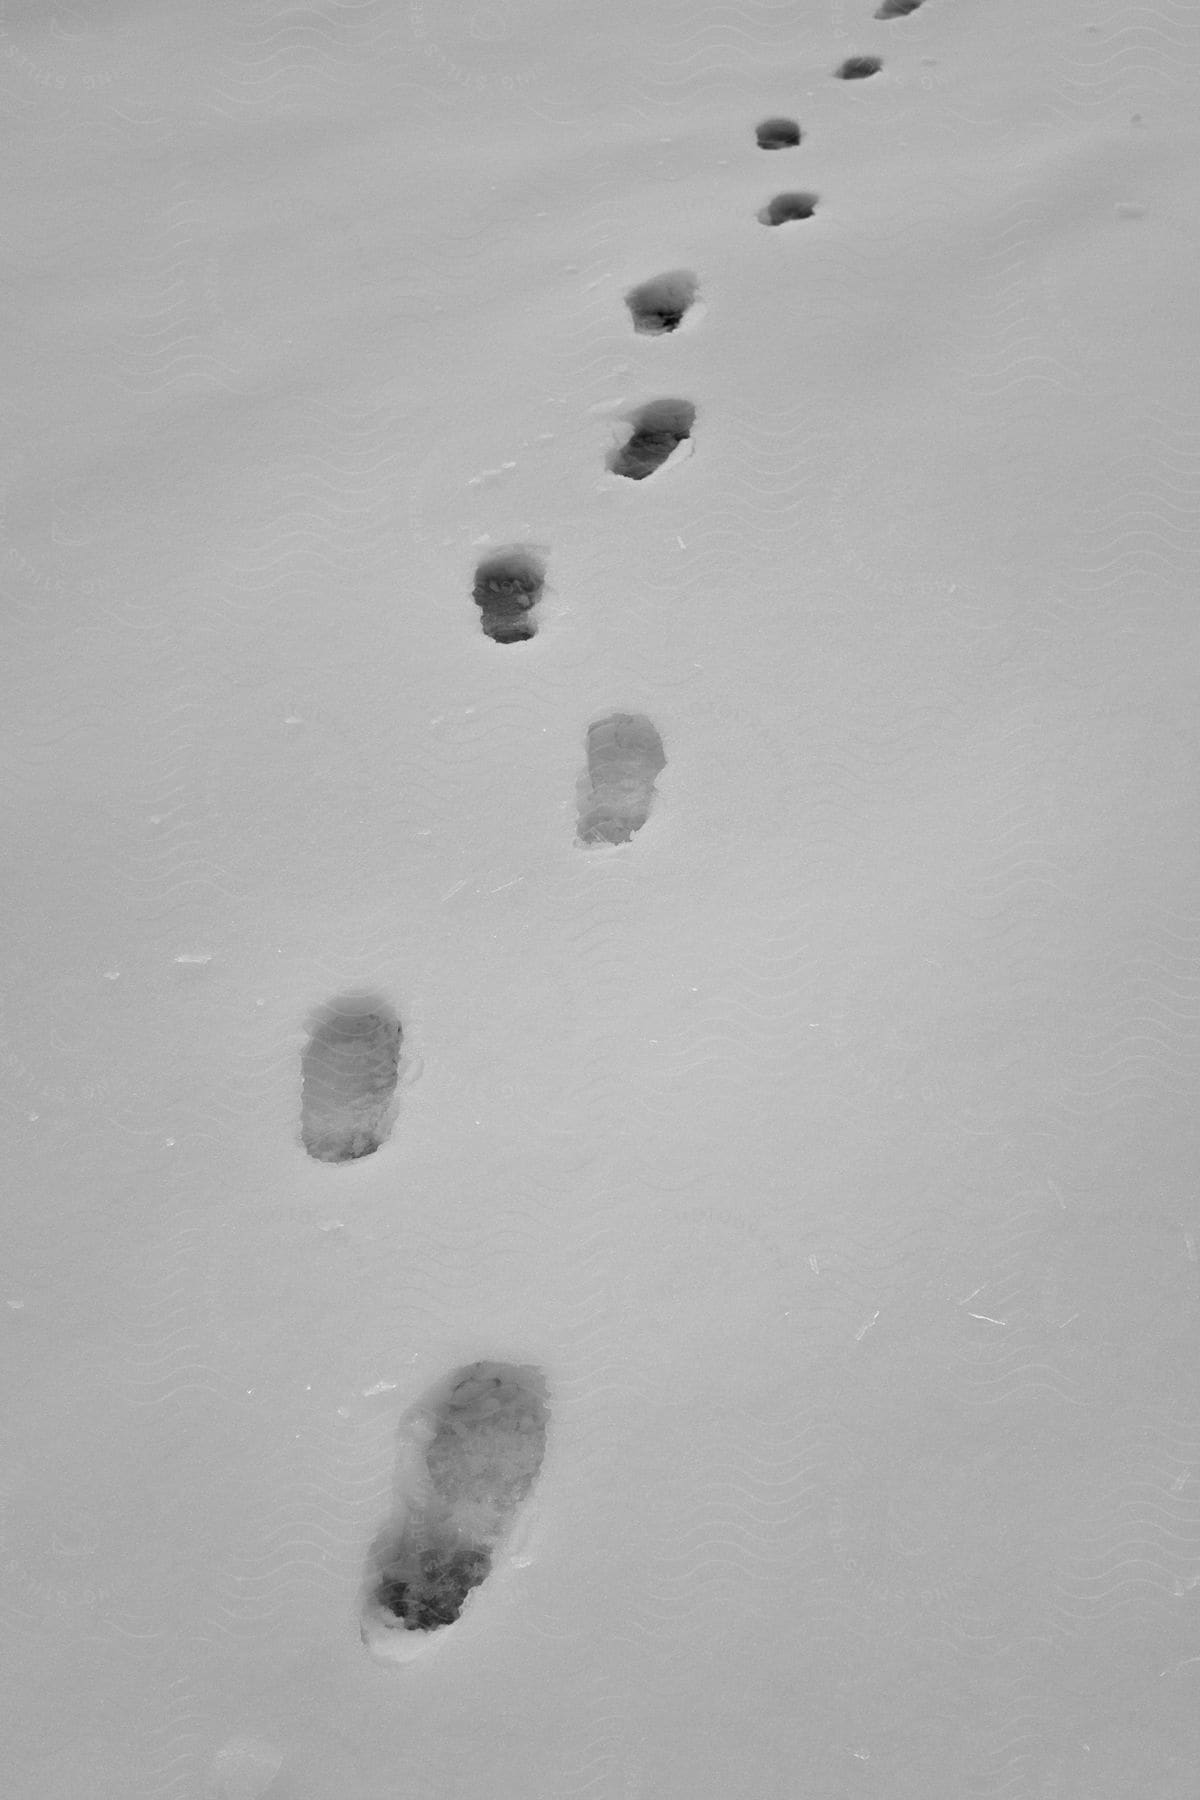 Boot footprints stretch across the snow covered ground